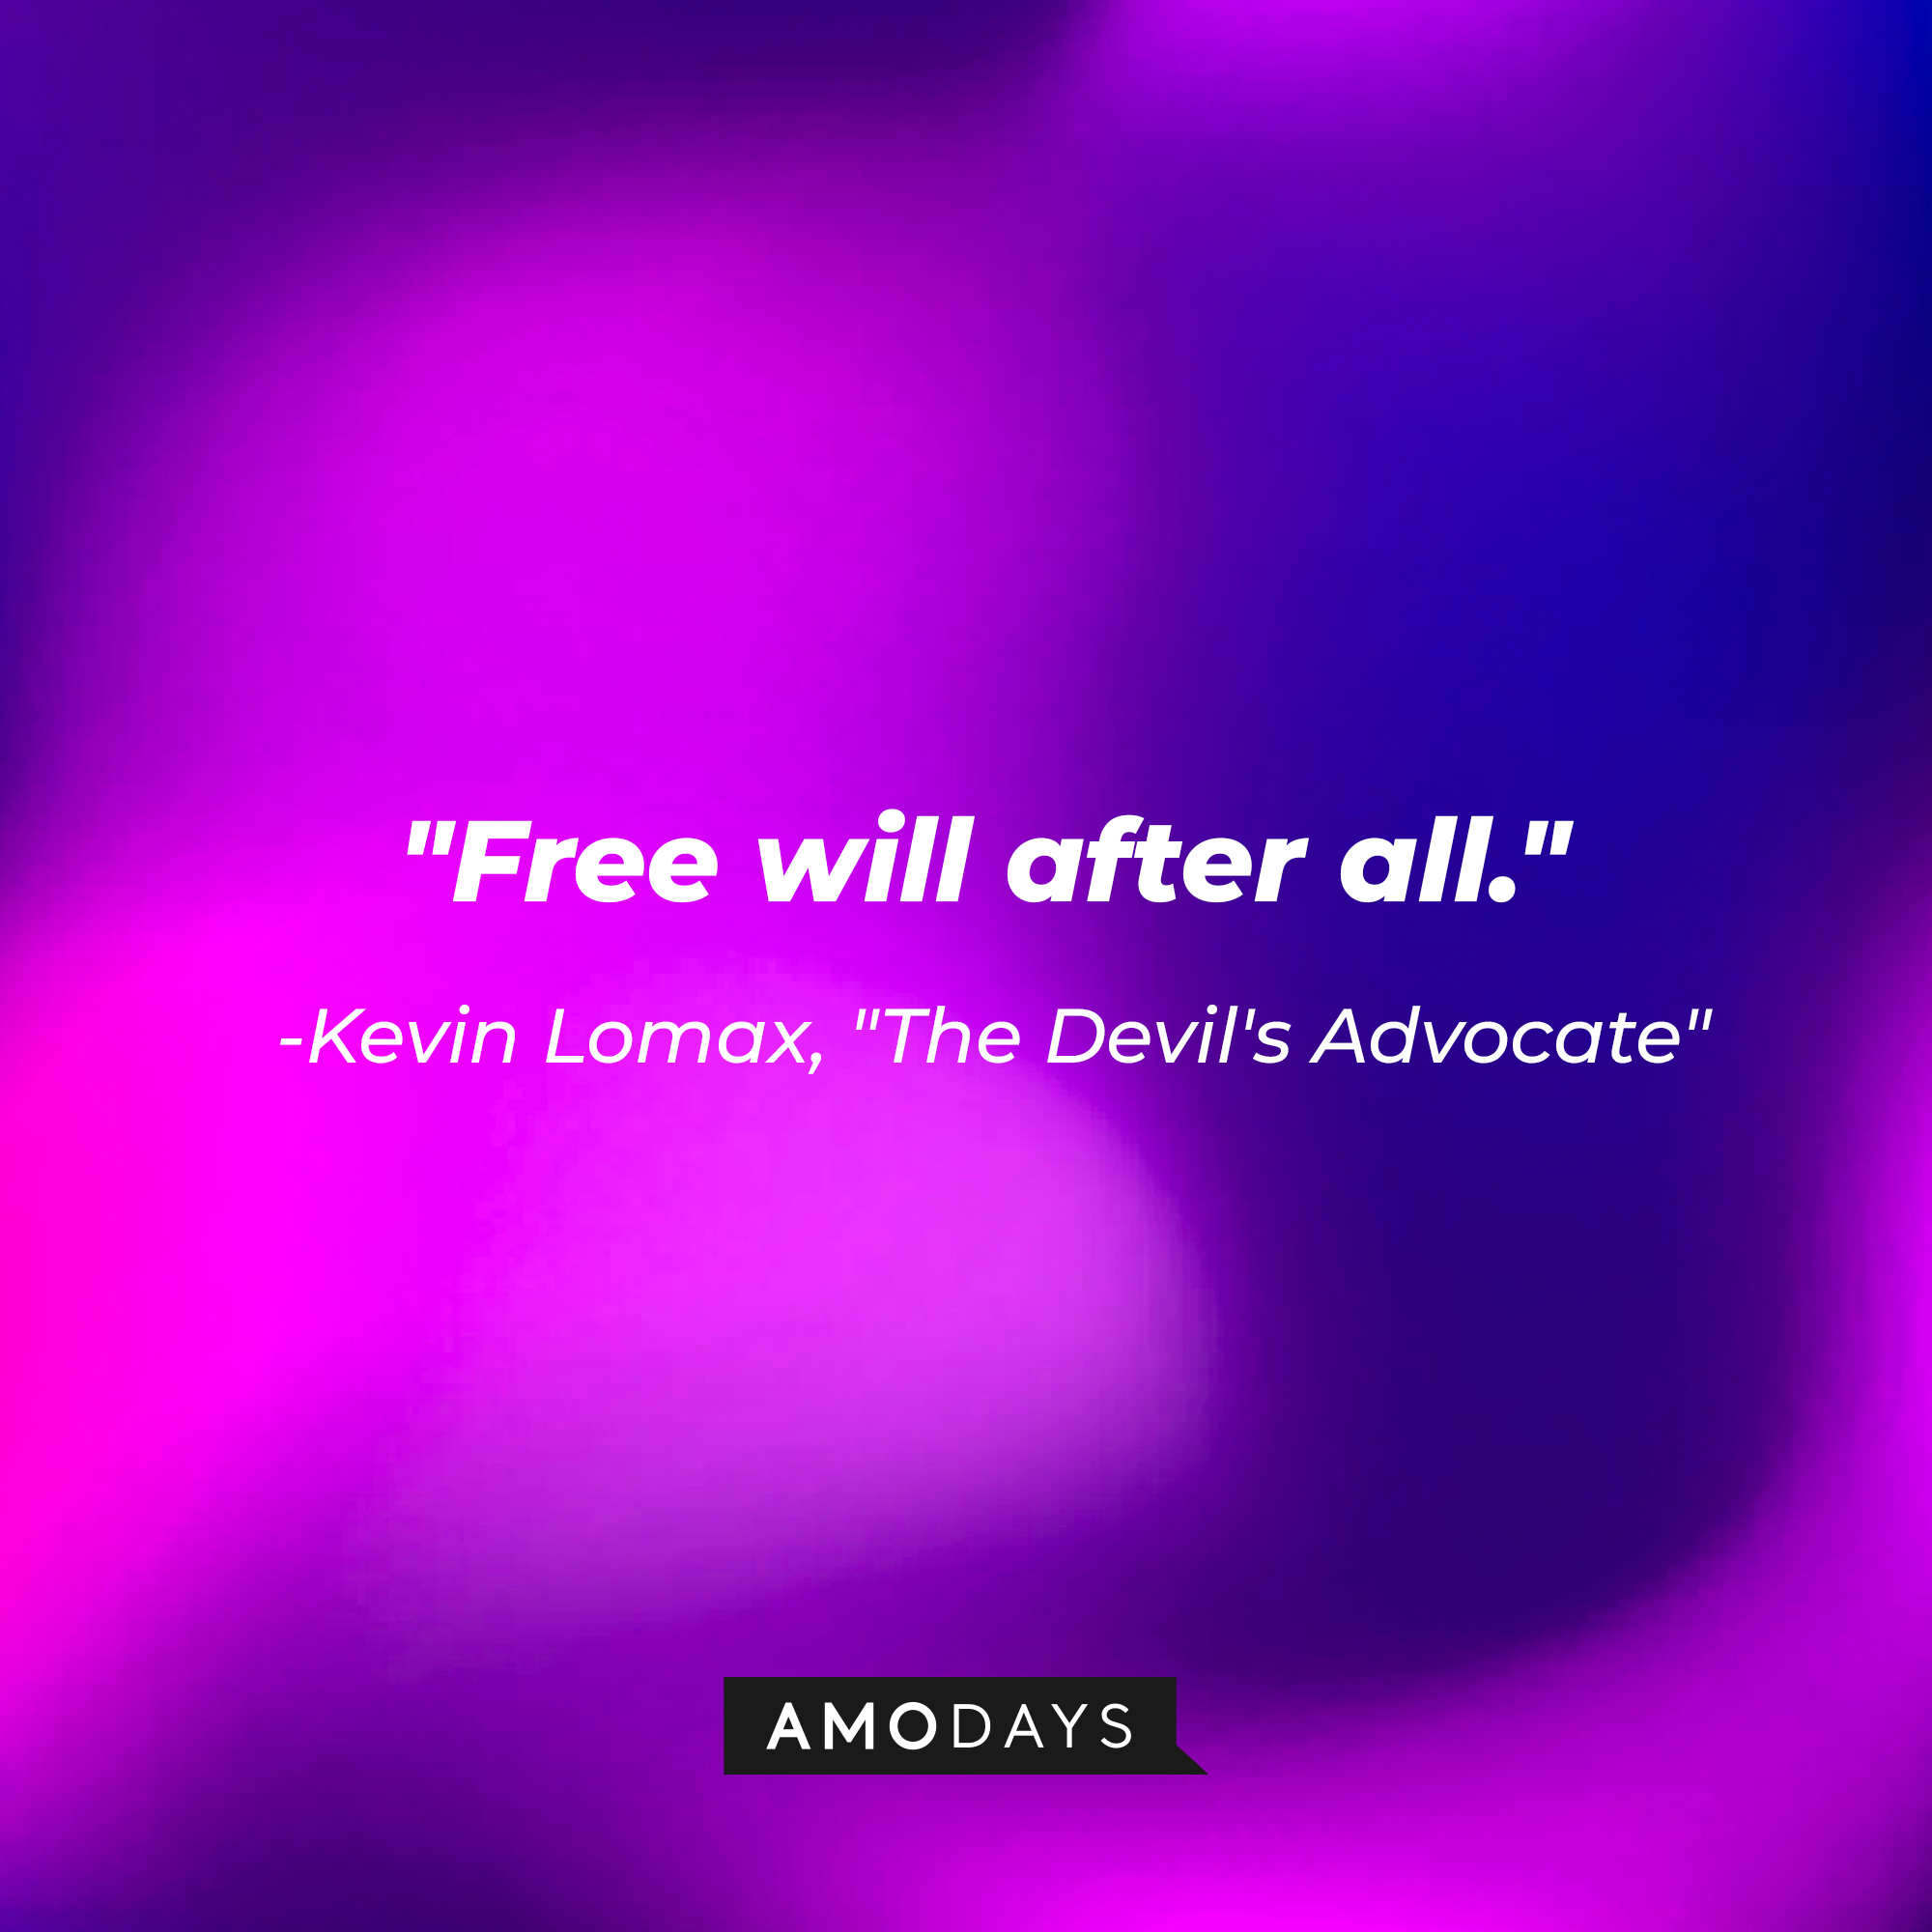 Kevin Lomax's quote: "Free will after all." | Source: AmoDays